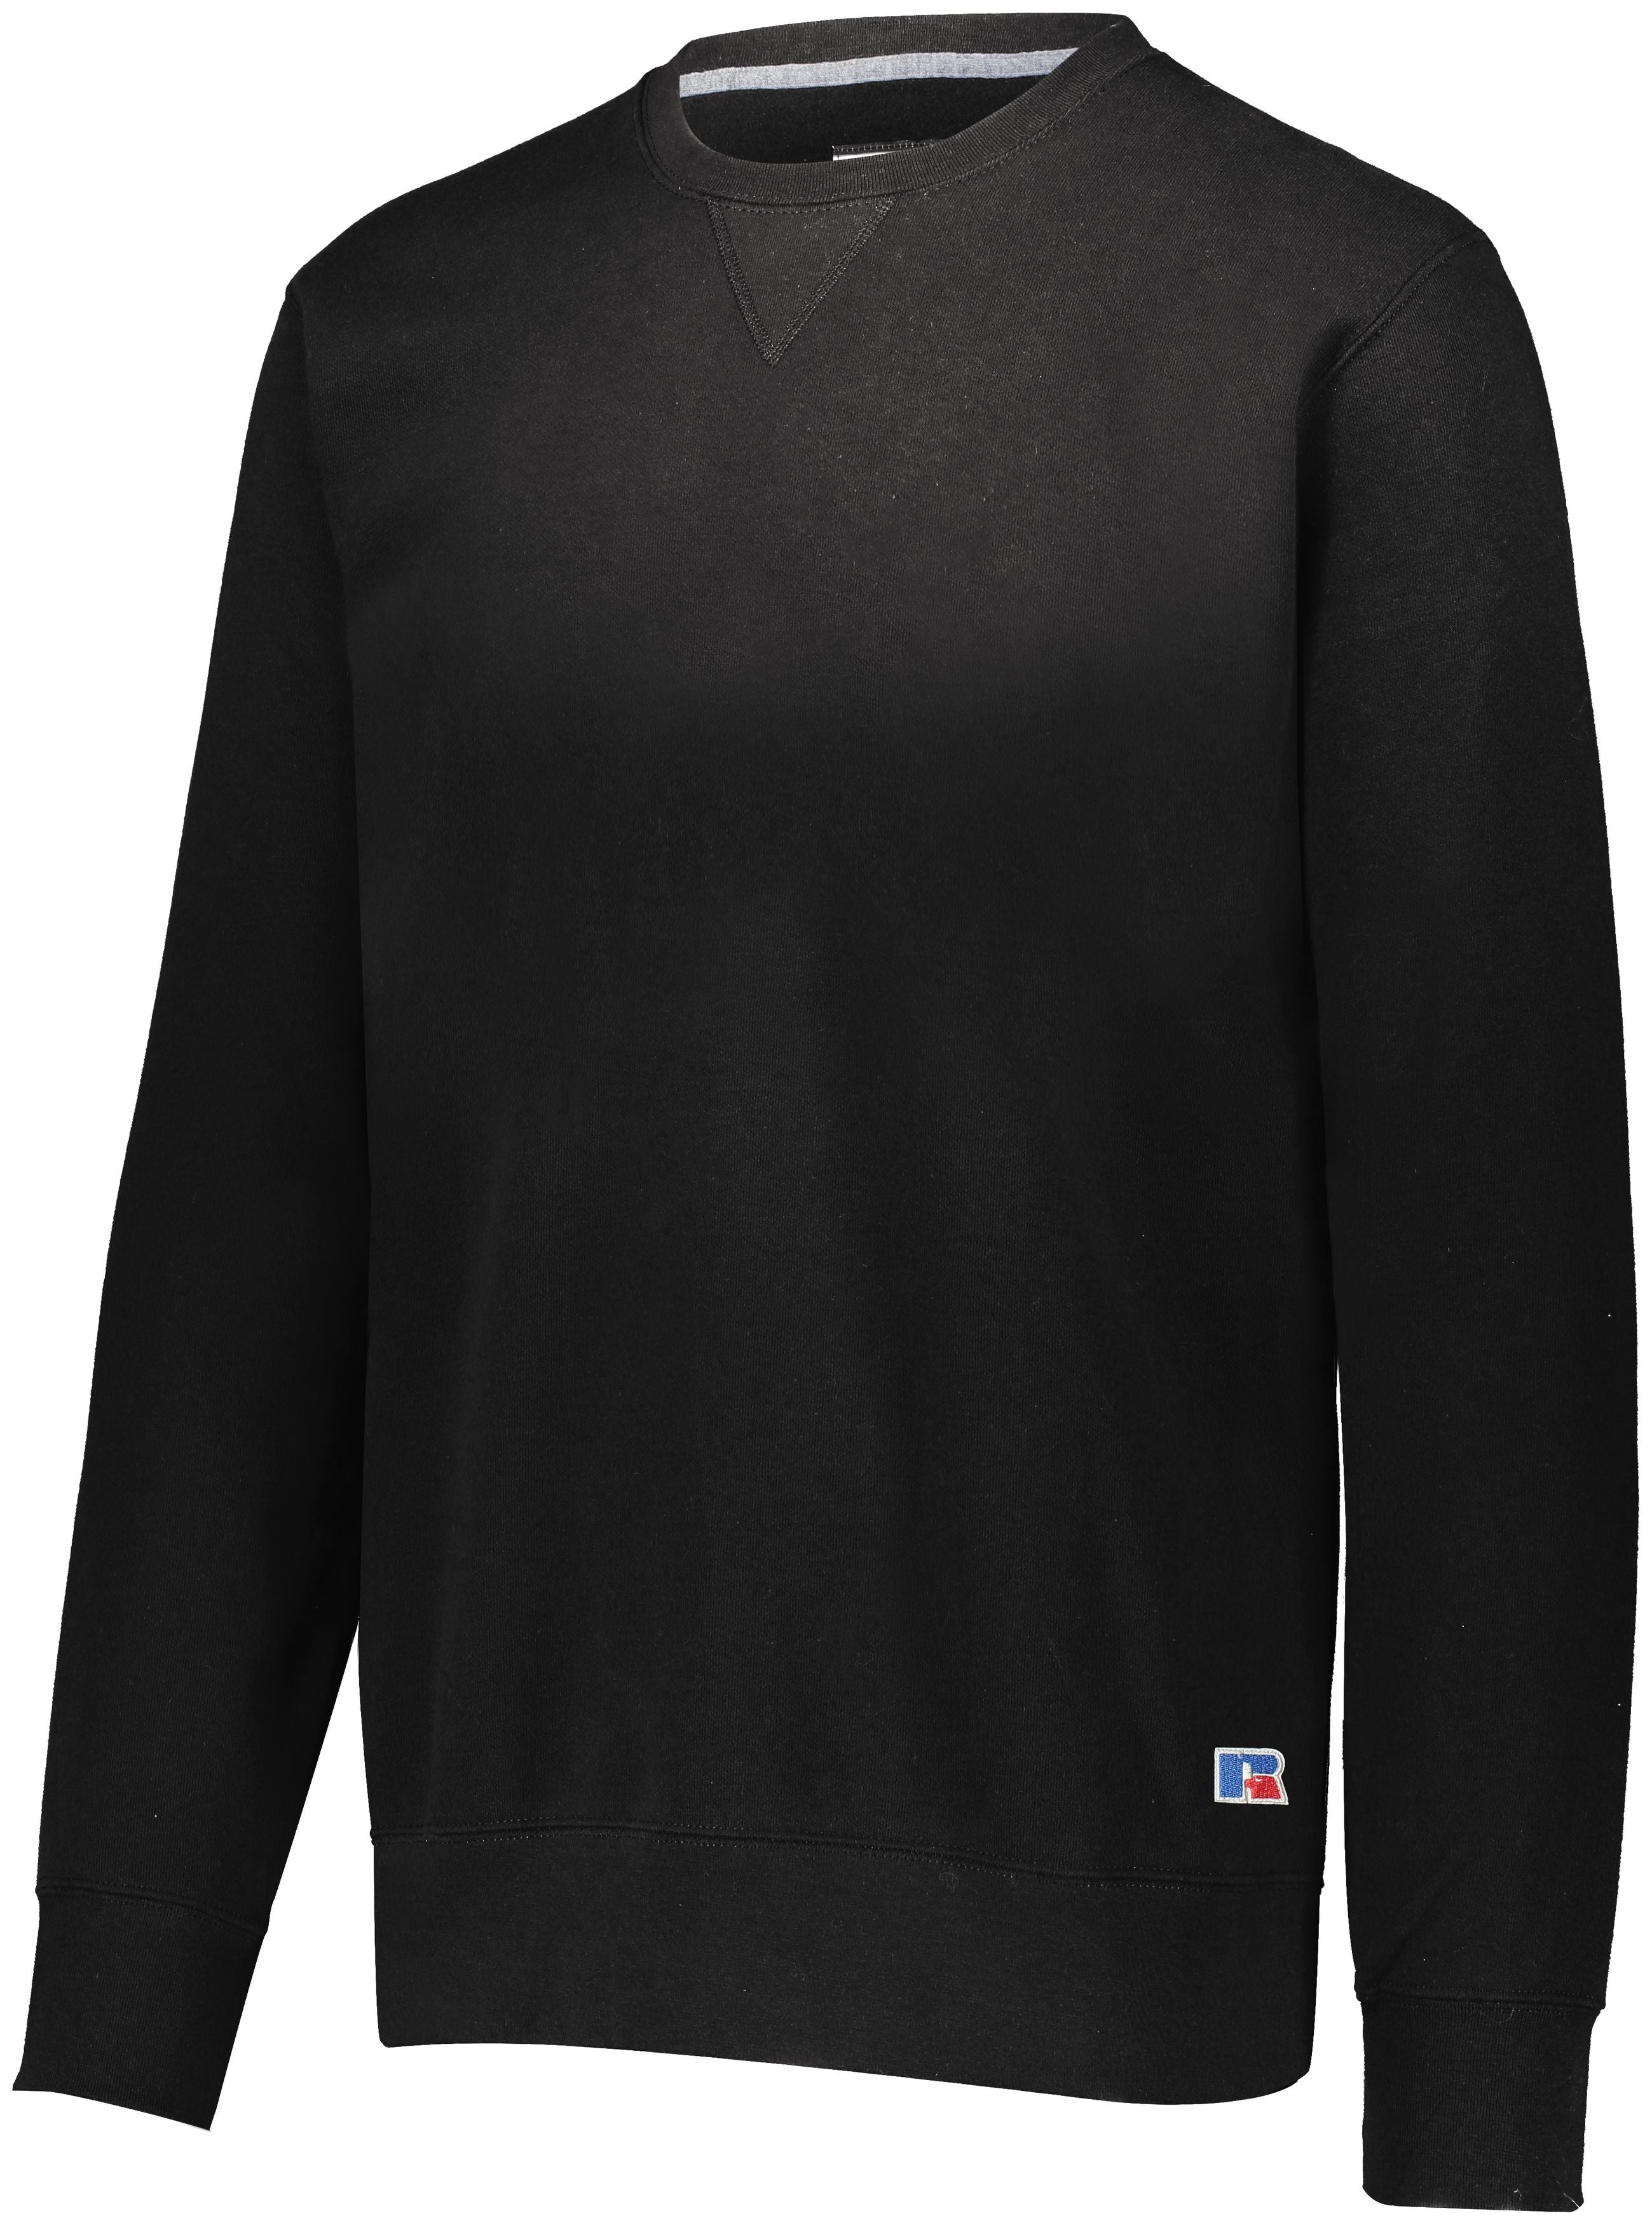 Russell Athletic 80/20 Fleece Crew in Black  -Part of the Adult, Russell-Athletic-Products product lines at KanaleyCreations.com